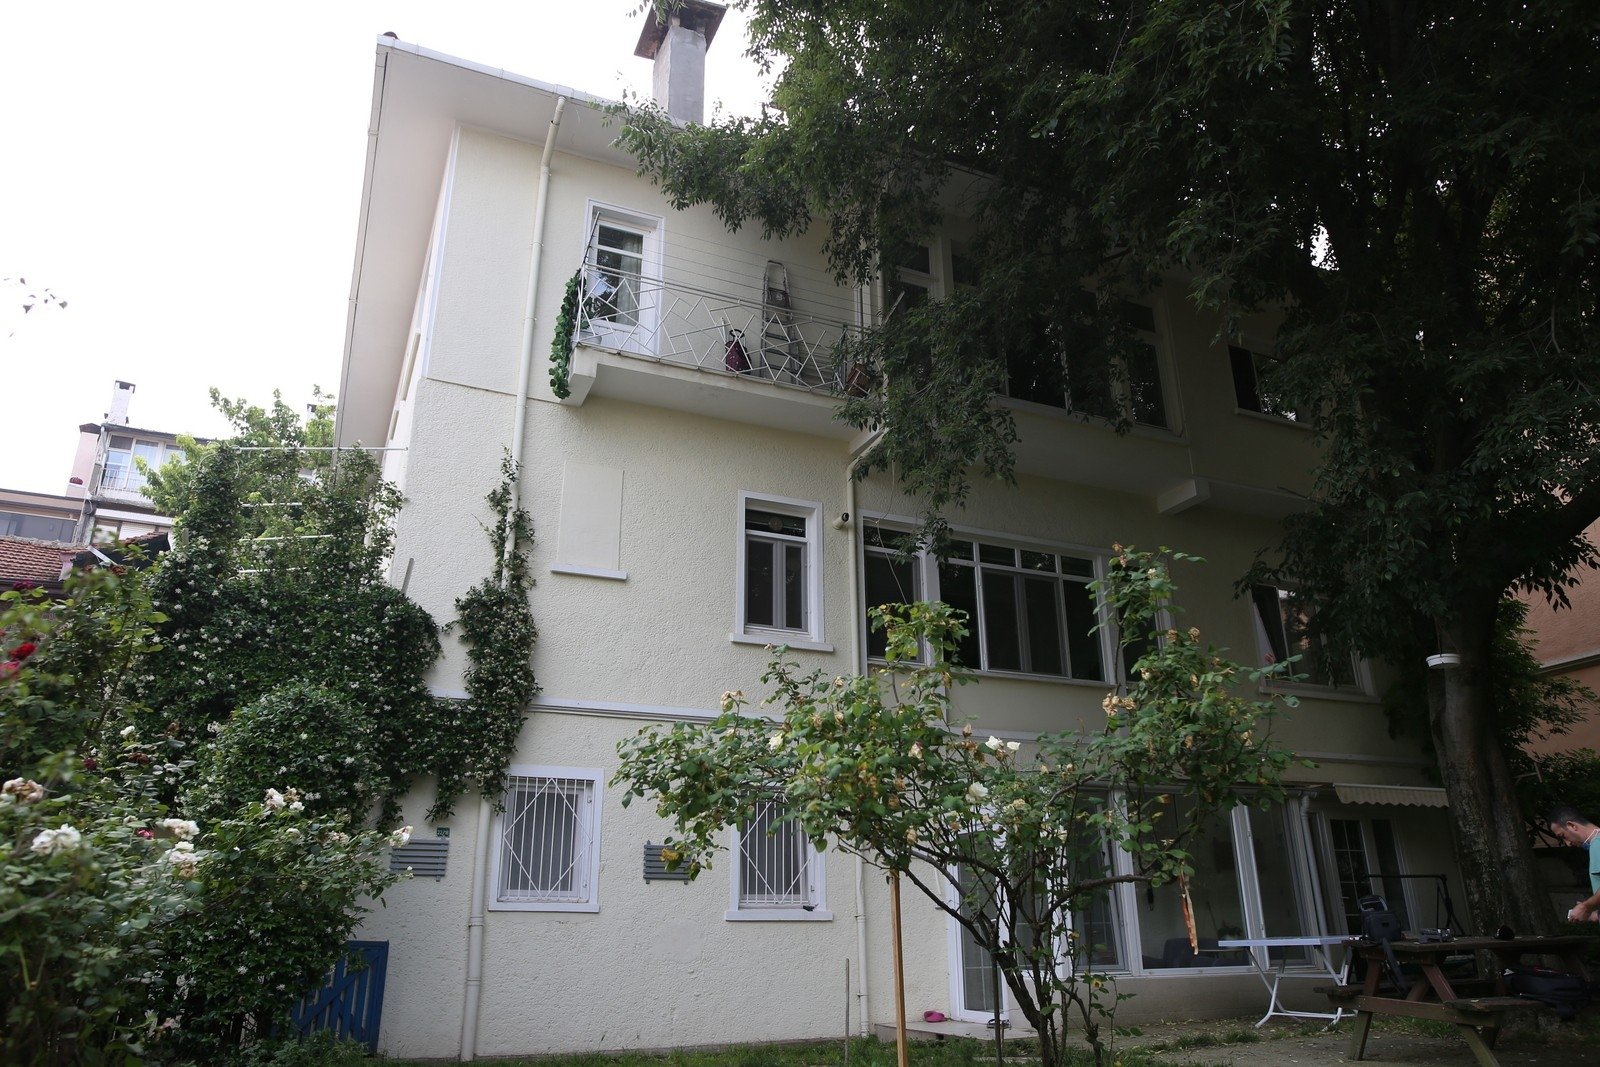 house where khomeini stayed during exile in turkey put on sale daily sabah